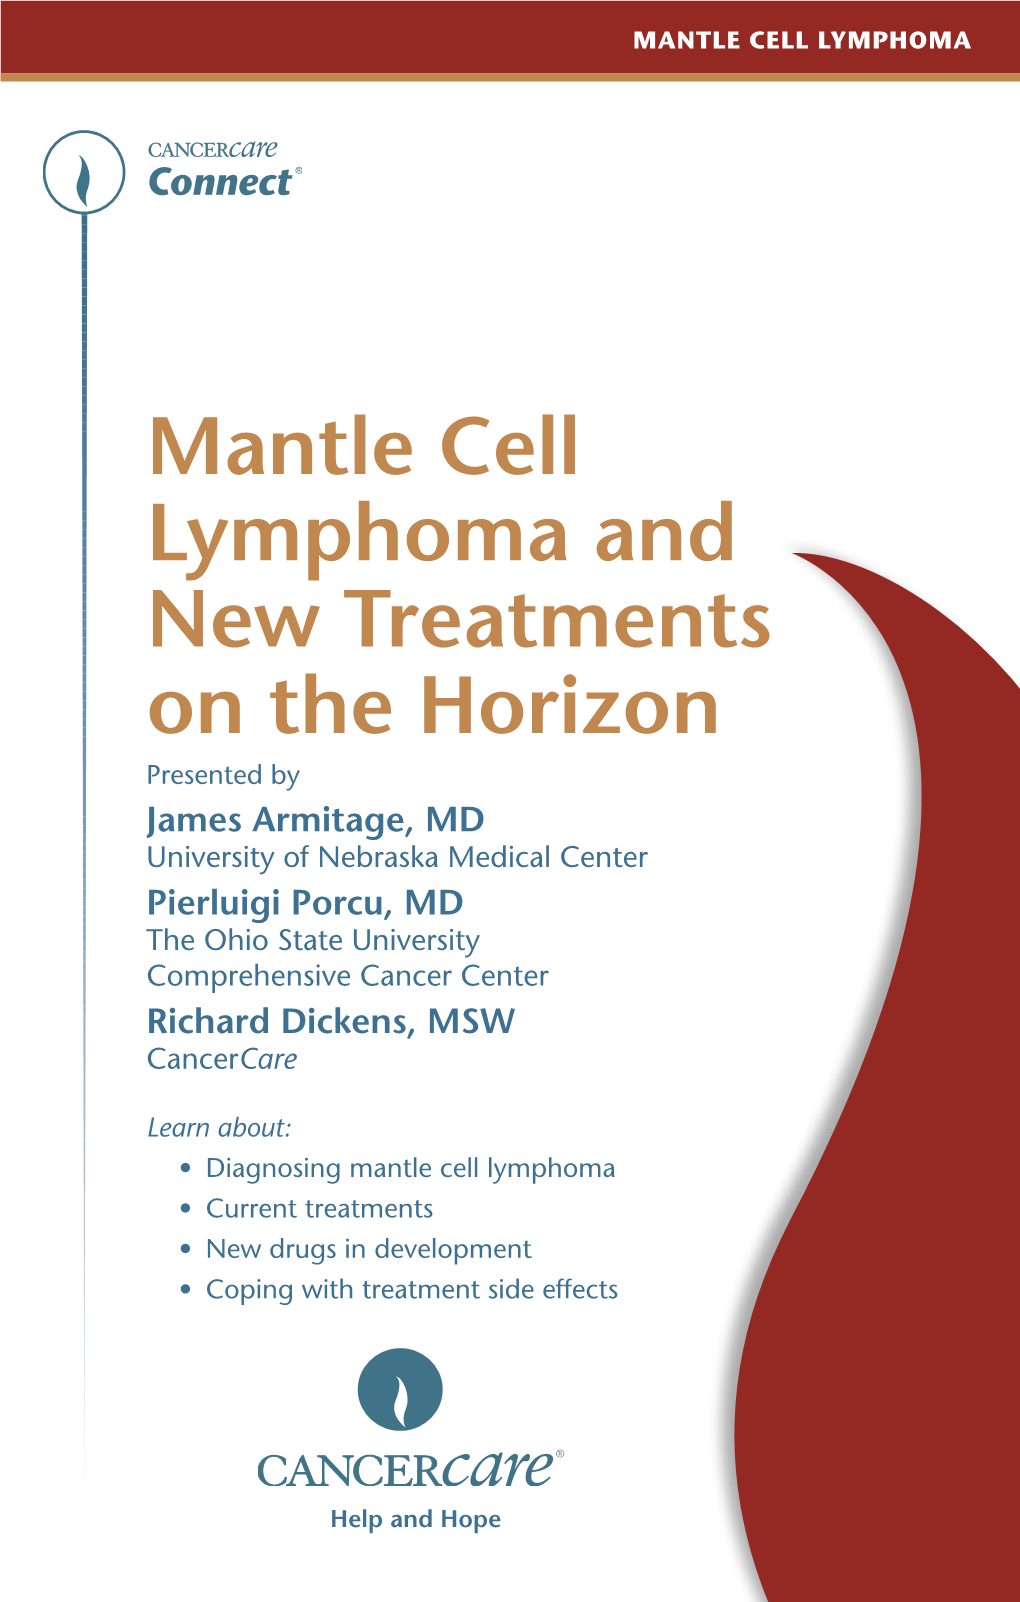 What Is Mantle Cell Lymphoma?